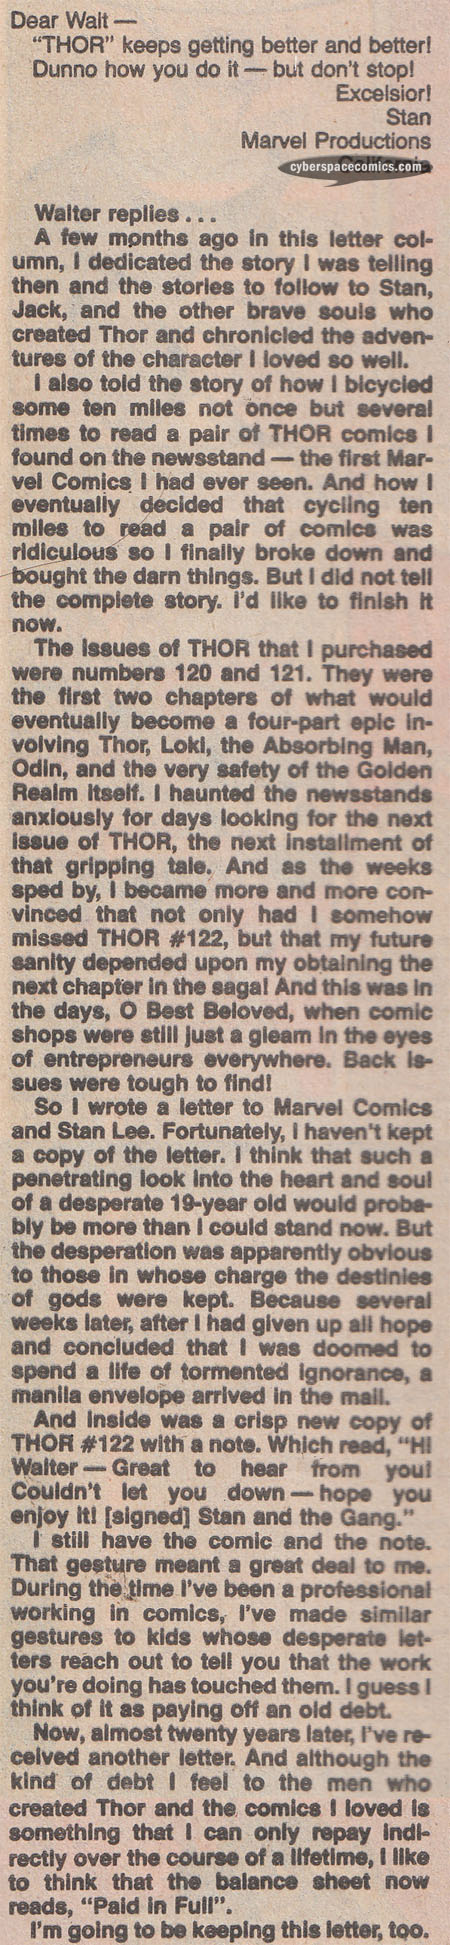 Thor letters page with Stan Lee